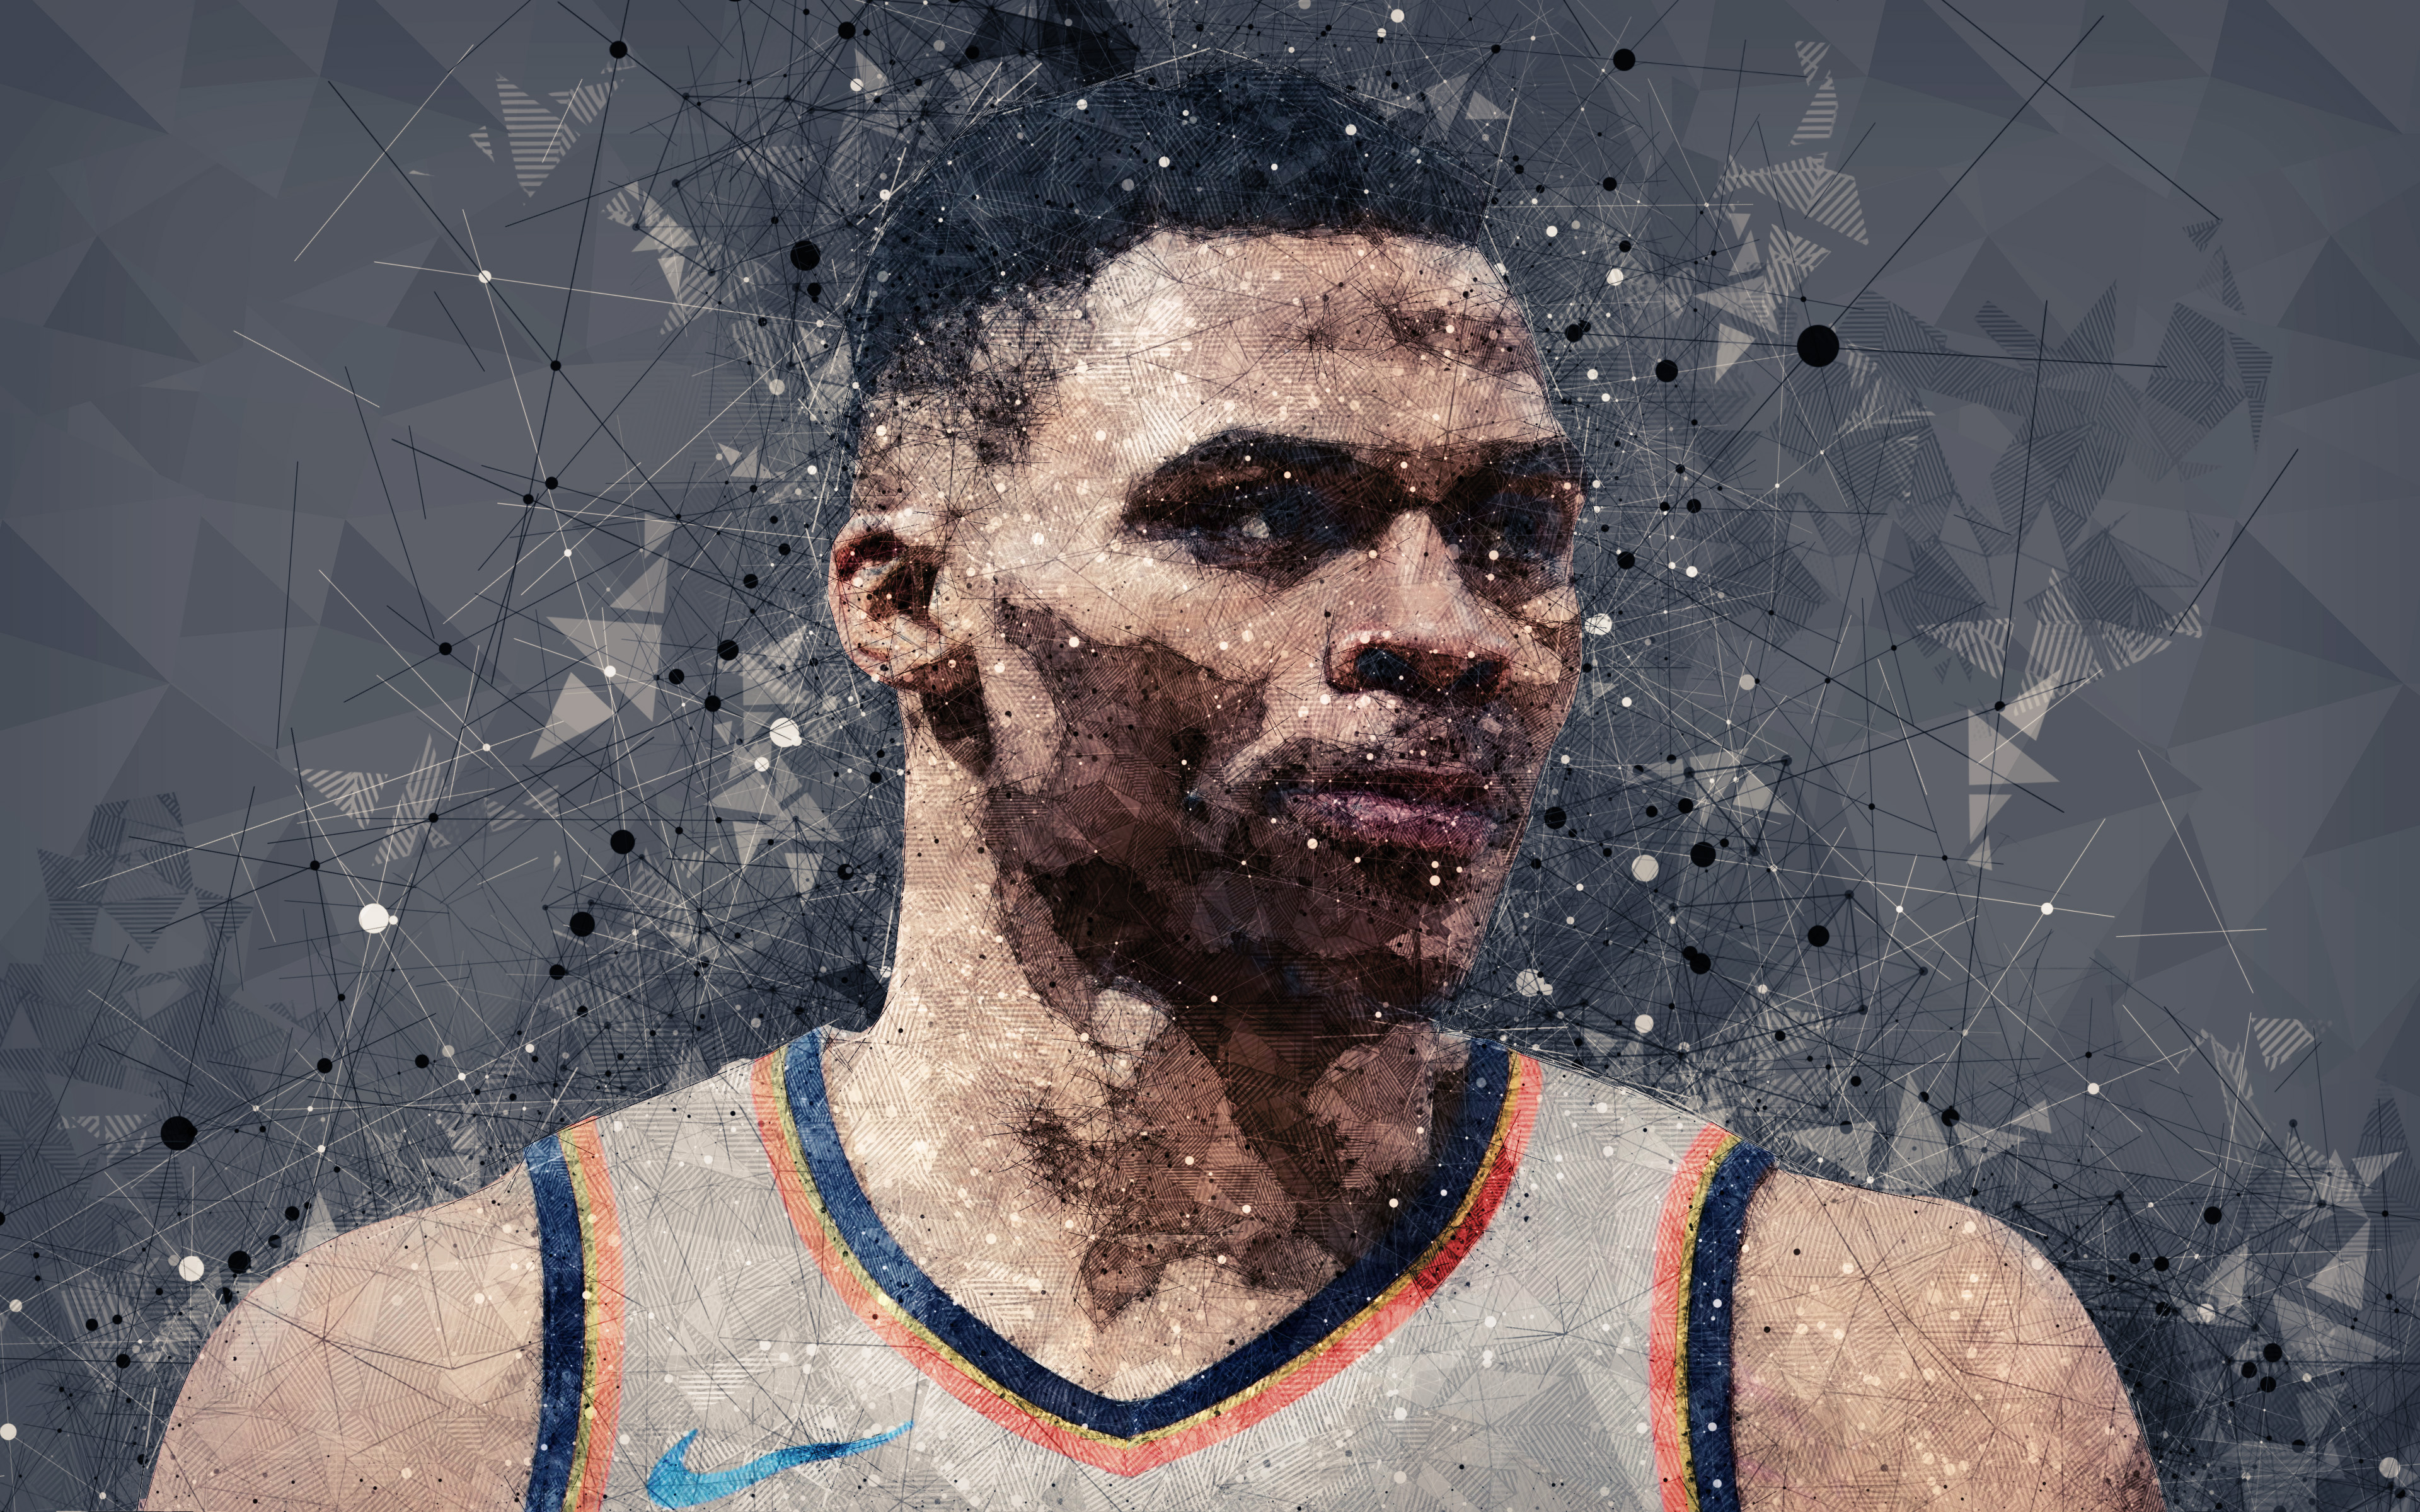 Russell westbrook HD wallpapers